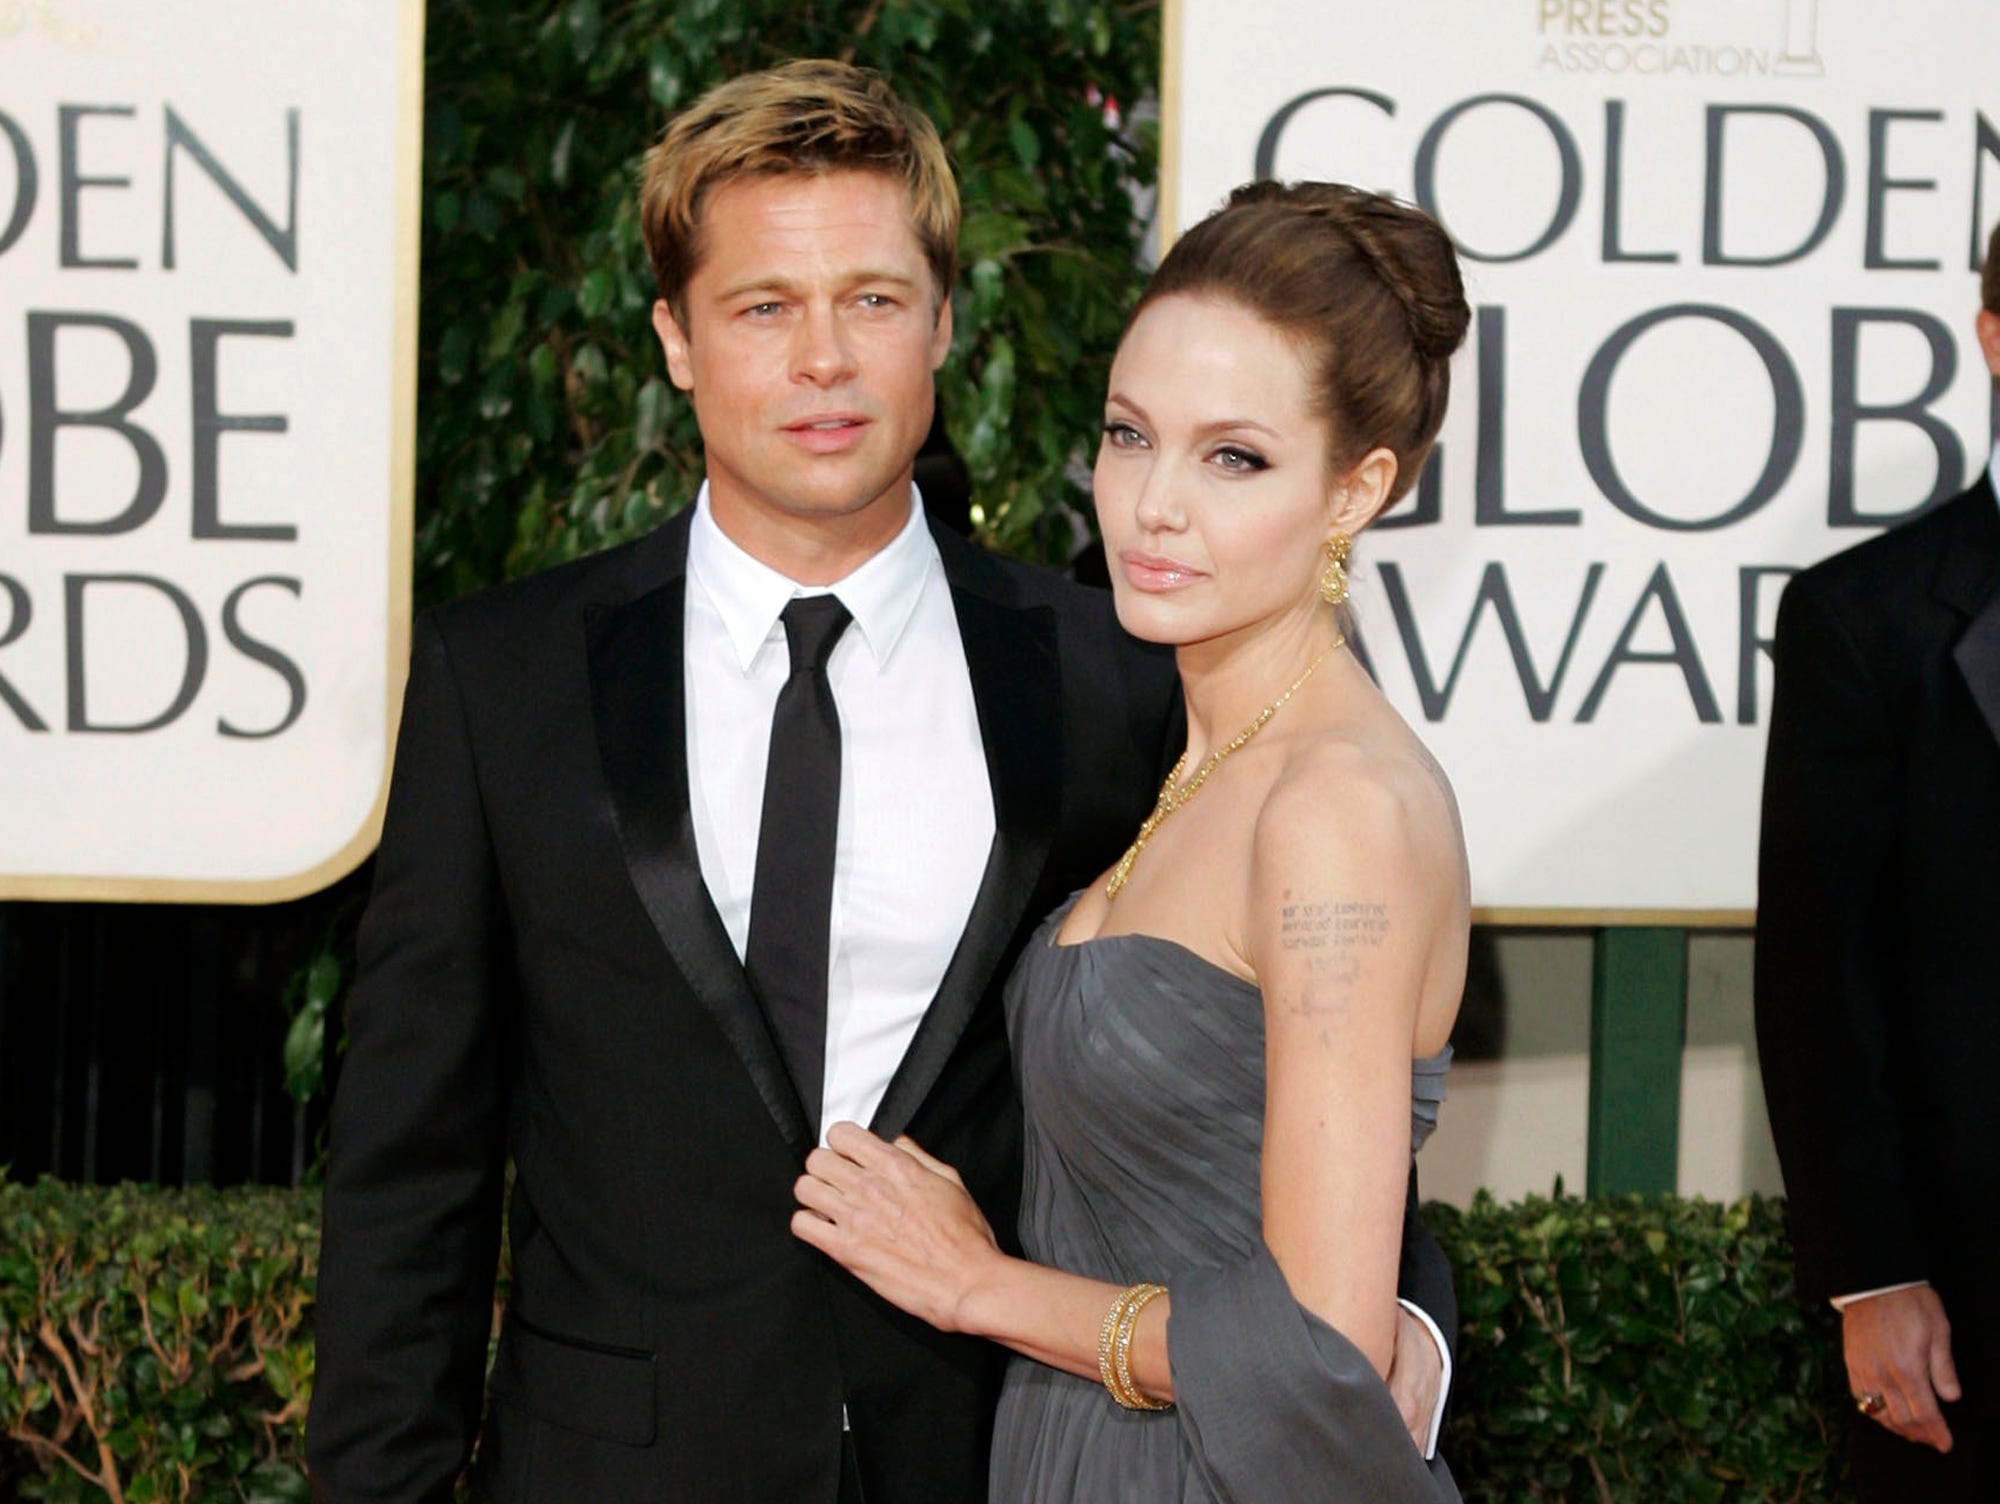 In this Jan. 15, 2007 file photo, Brad Pitt, and actress Angelina Jolie arrive for the 64th Annual Golden Globe Awards in Beverly Hills, Calif.